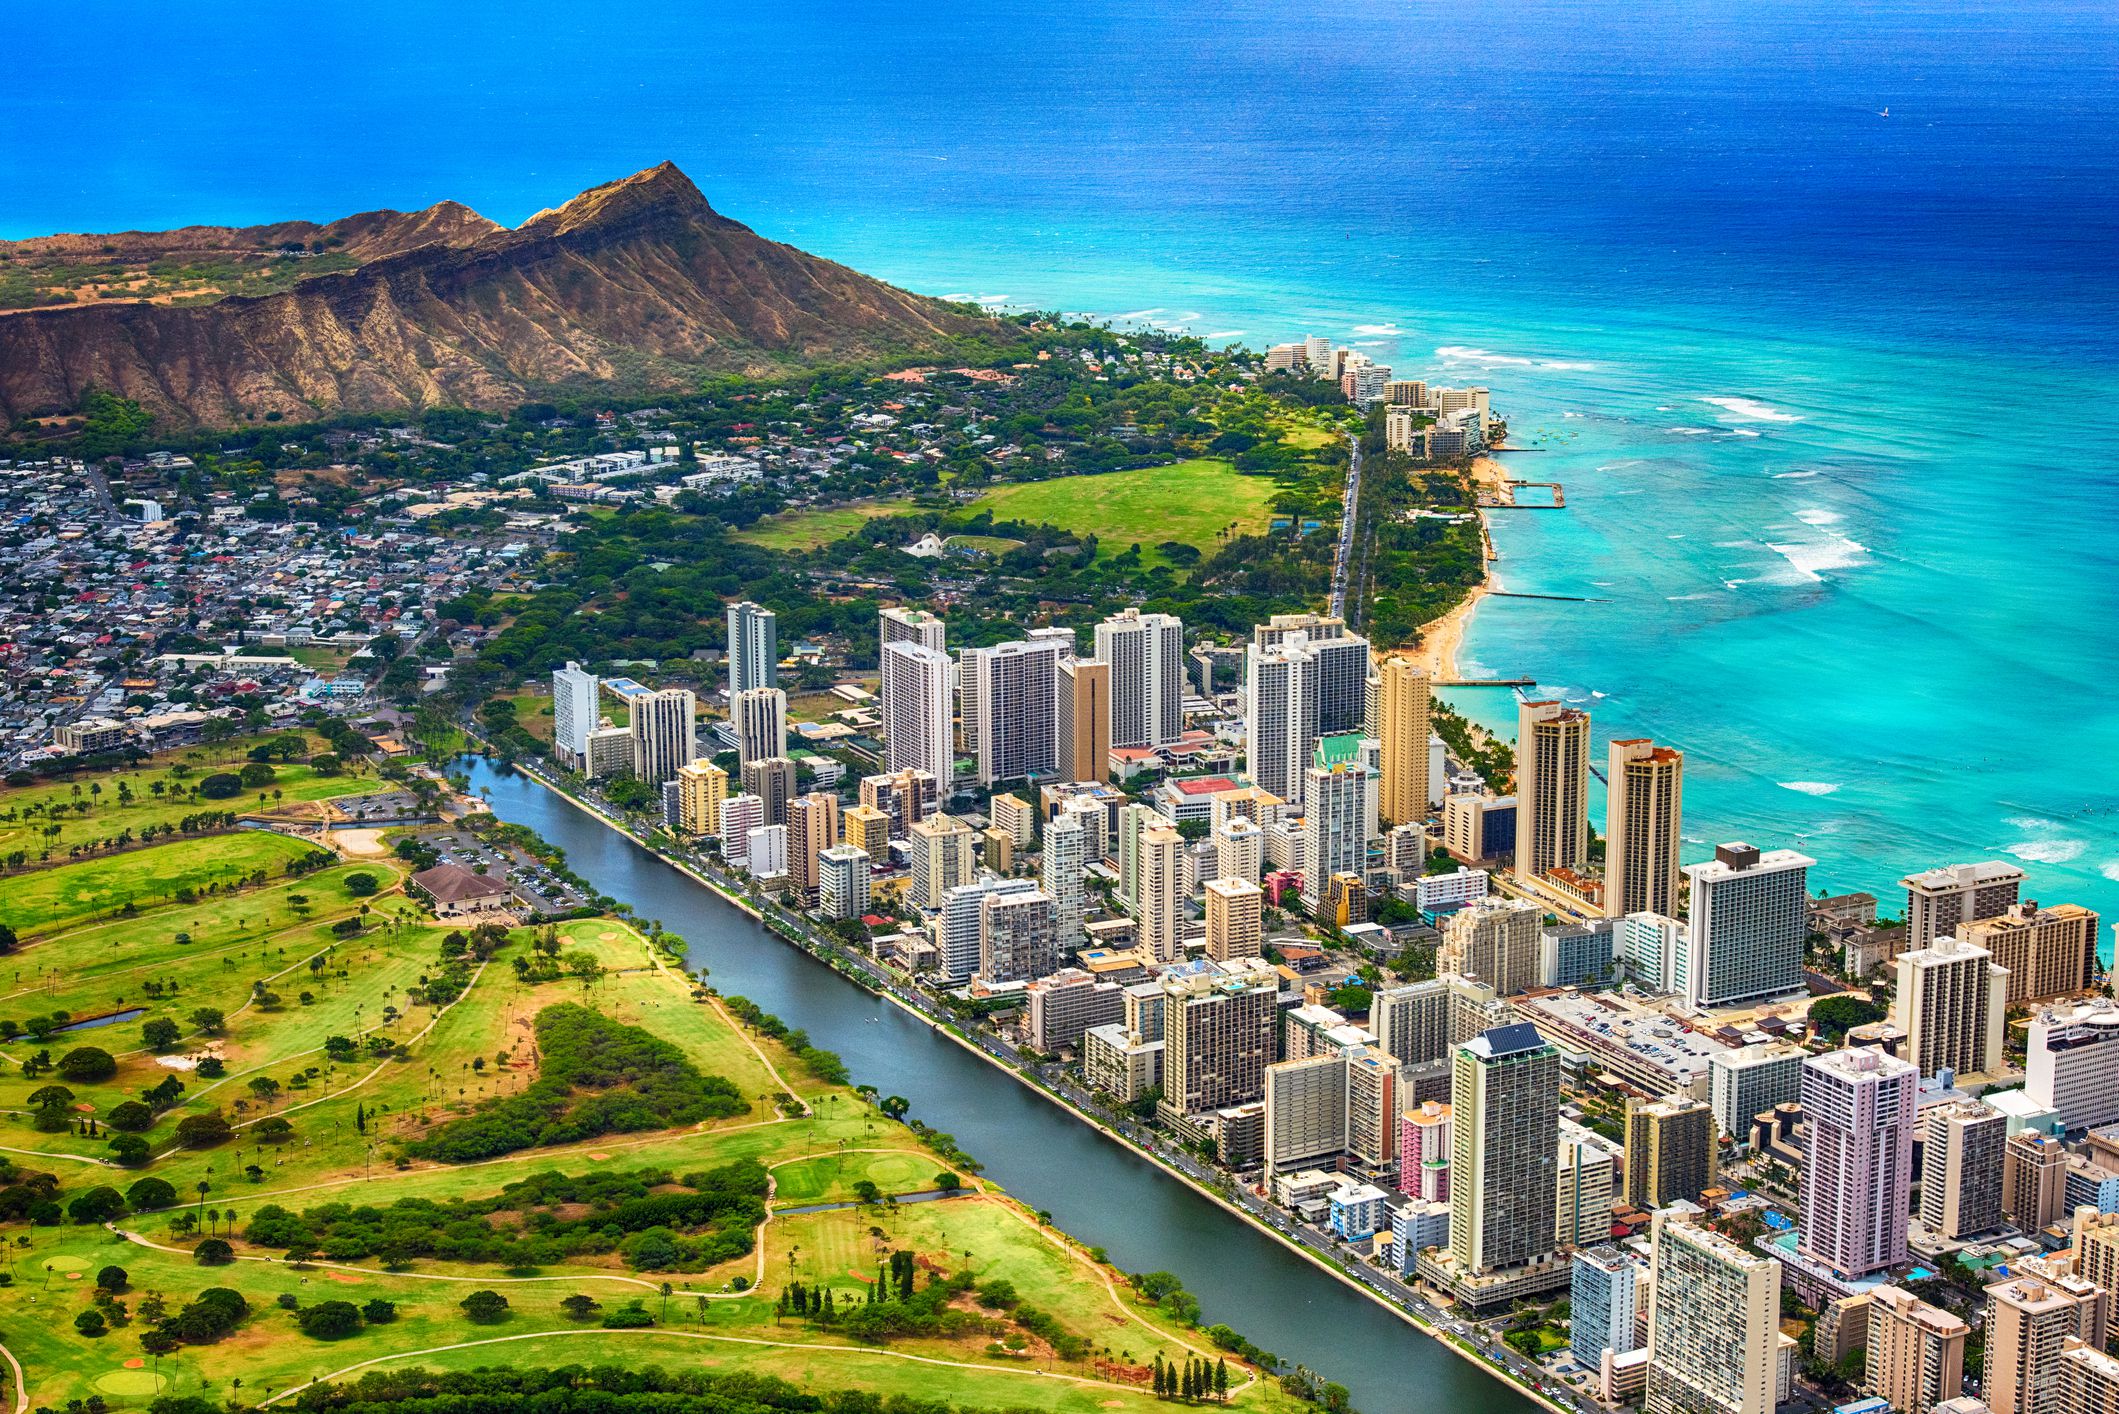 <p>Honolulu is home to world famous Waikiki Beach, which is lined with highrise hotels, and provides easy access to shopping. Waikiki welcomes sunbathers, swimmers and world class surfing competitions throughout the year.</p><ul><li>Population: 343,421</li><li>Median Household Income: $76,495</li><li>Cost of Living: 165% of U.S. average</li><li>Median Rent Price: $2,700</li><li>Home Price-to-Income Ratio: 10</li><li>Average Property Tax: 0.32%</li></ul><p class="padding-top-ms u-margin-bottom-ms"><b>Housing Affordability: </b>The average cost to rent in Honolulu is $2,700, rising year over year. The rental market is cool at the moment. The average home value here is around $775,000, although this is a big city with a wide range of properties and price points available.</p>